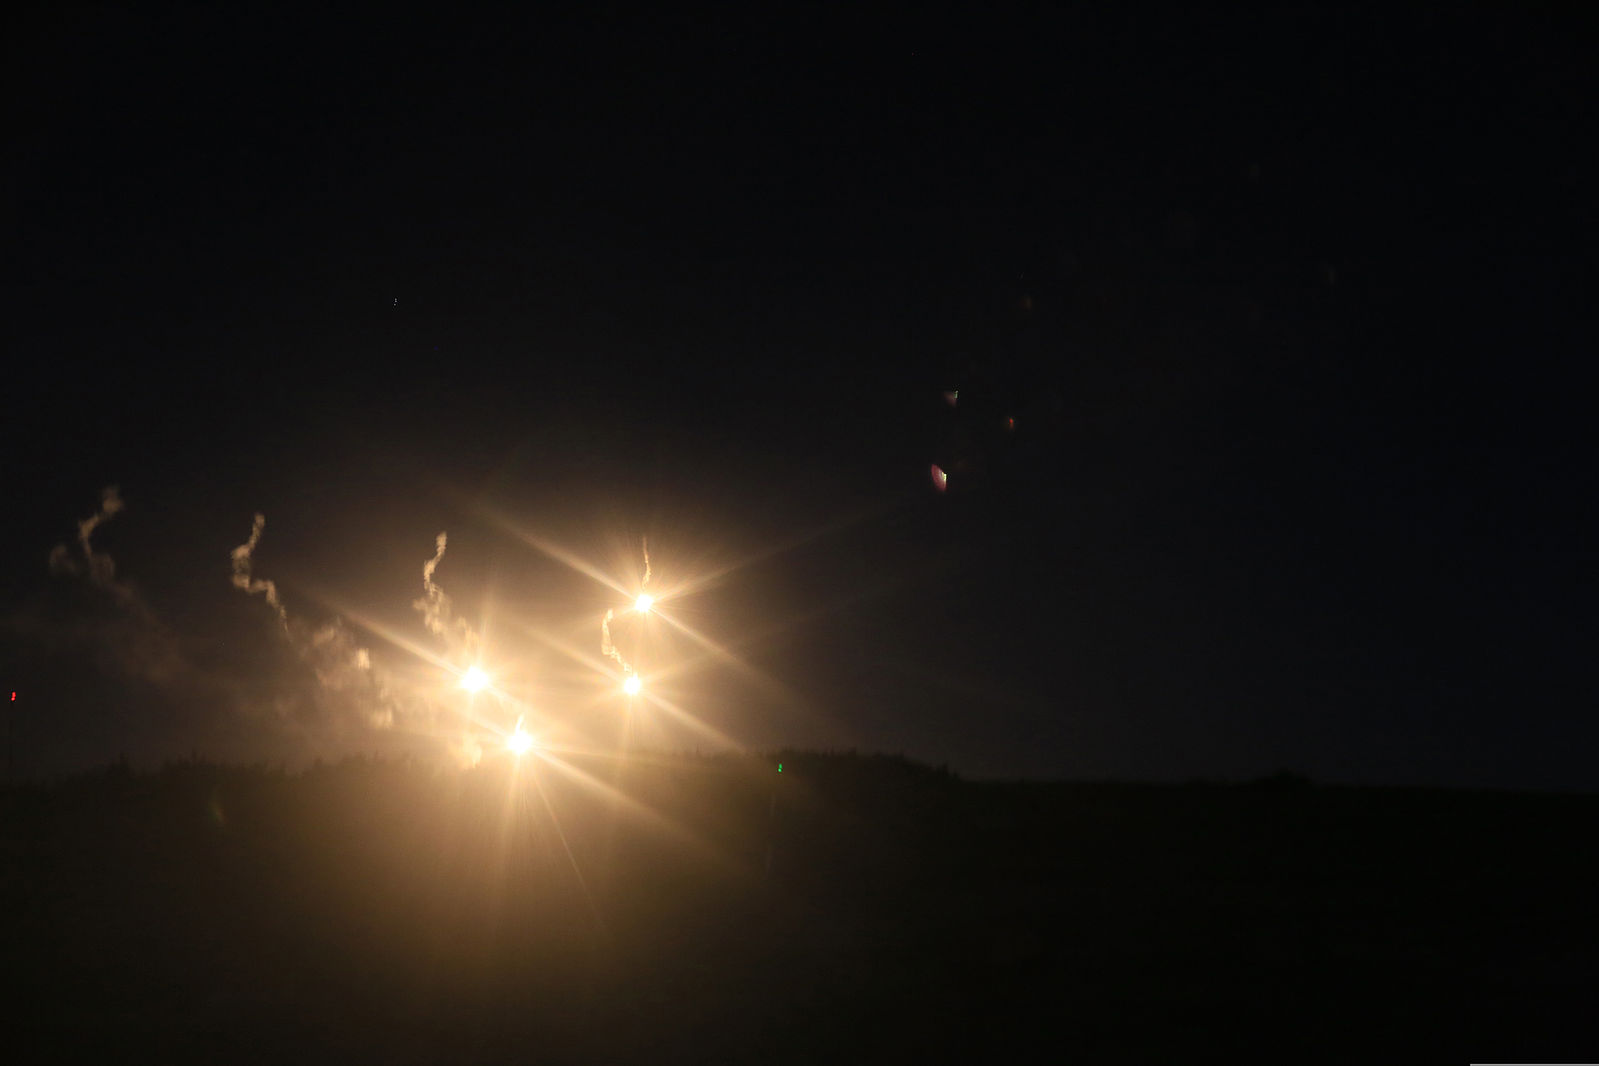 Canada to obtain 10,000 units of the illumination flares for search and rescue